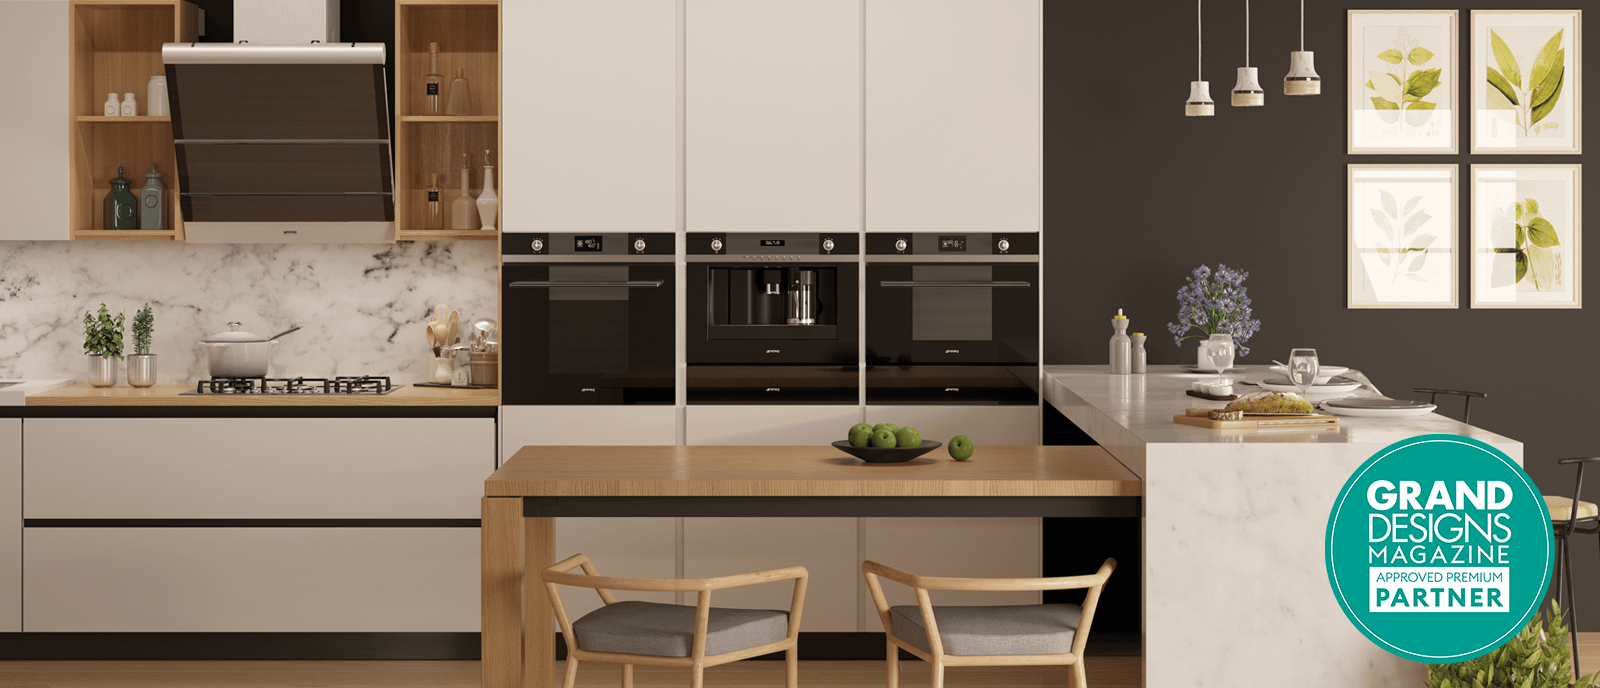 A Smeg kitchen roomset featuring built in appliances and an extractor. The image also shows the Grand Designs Magazine Approved Premium Partner logo.